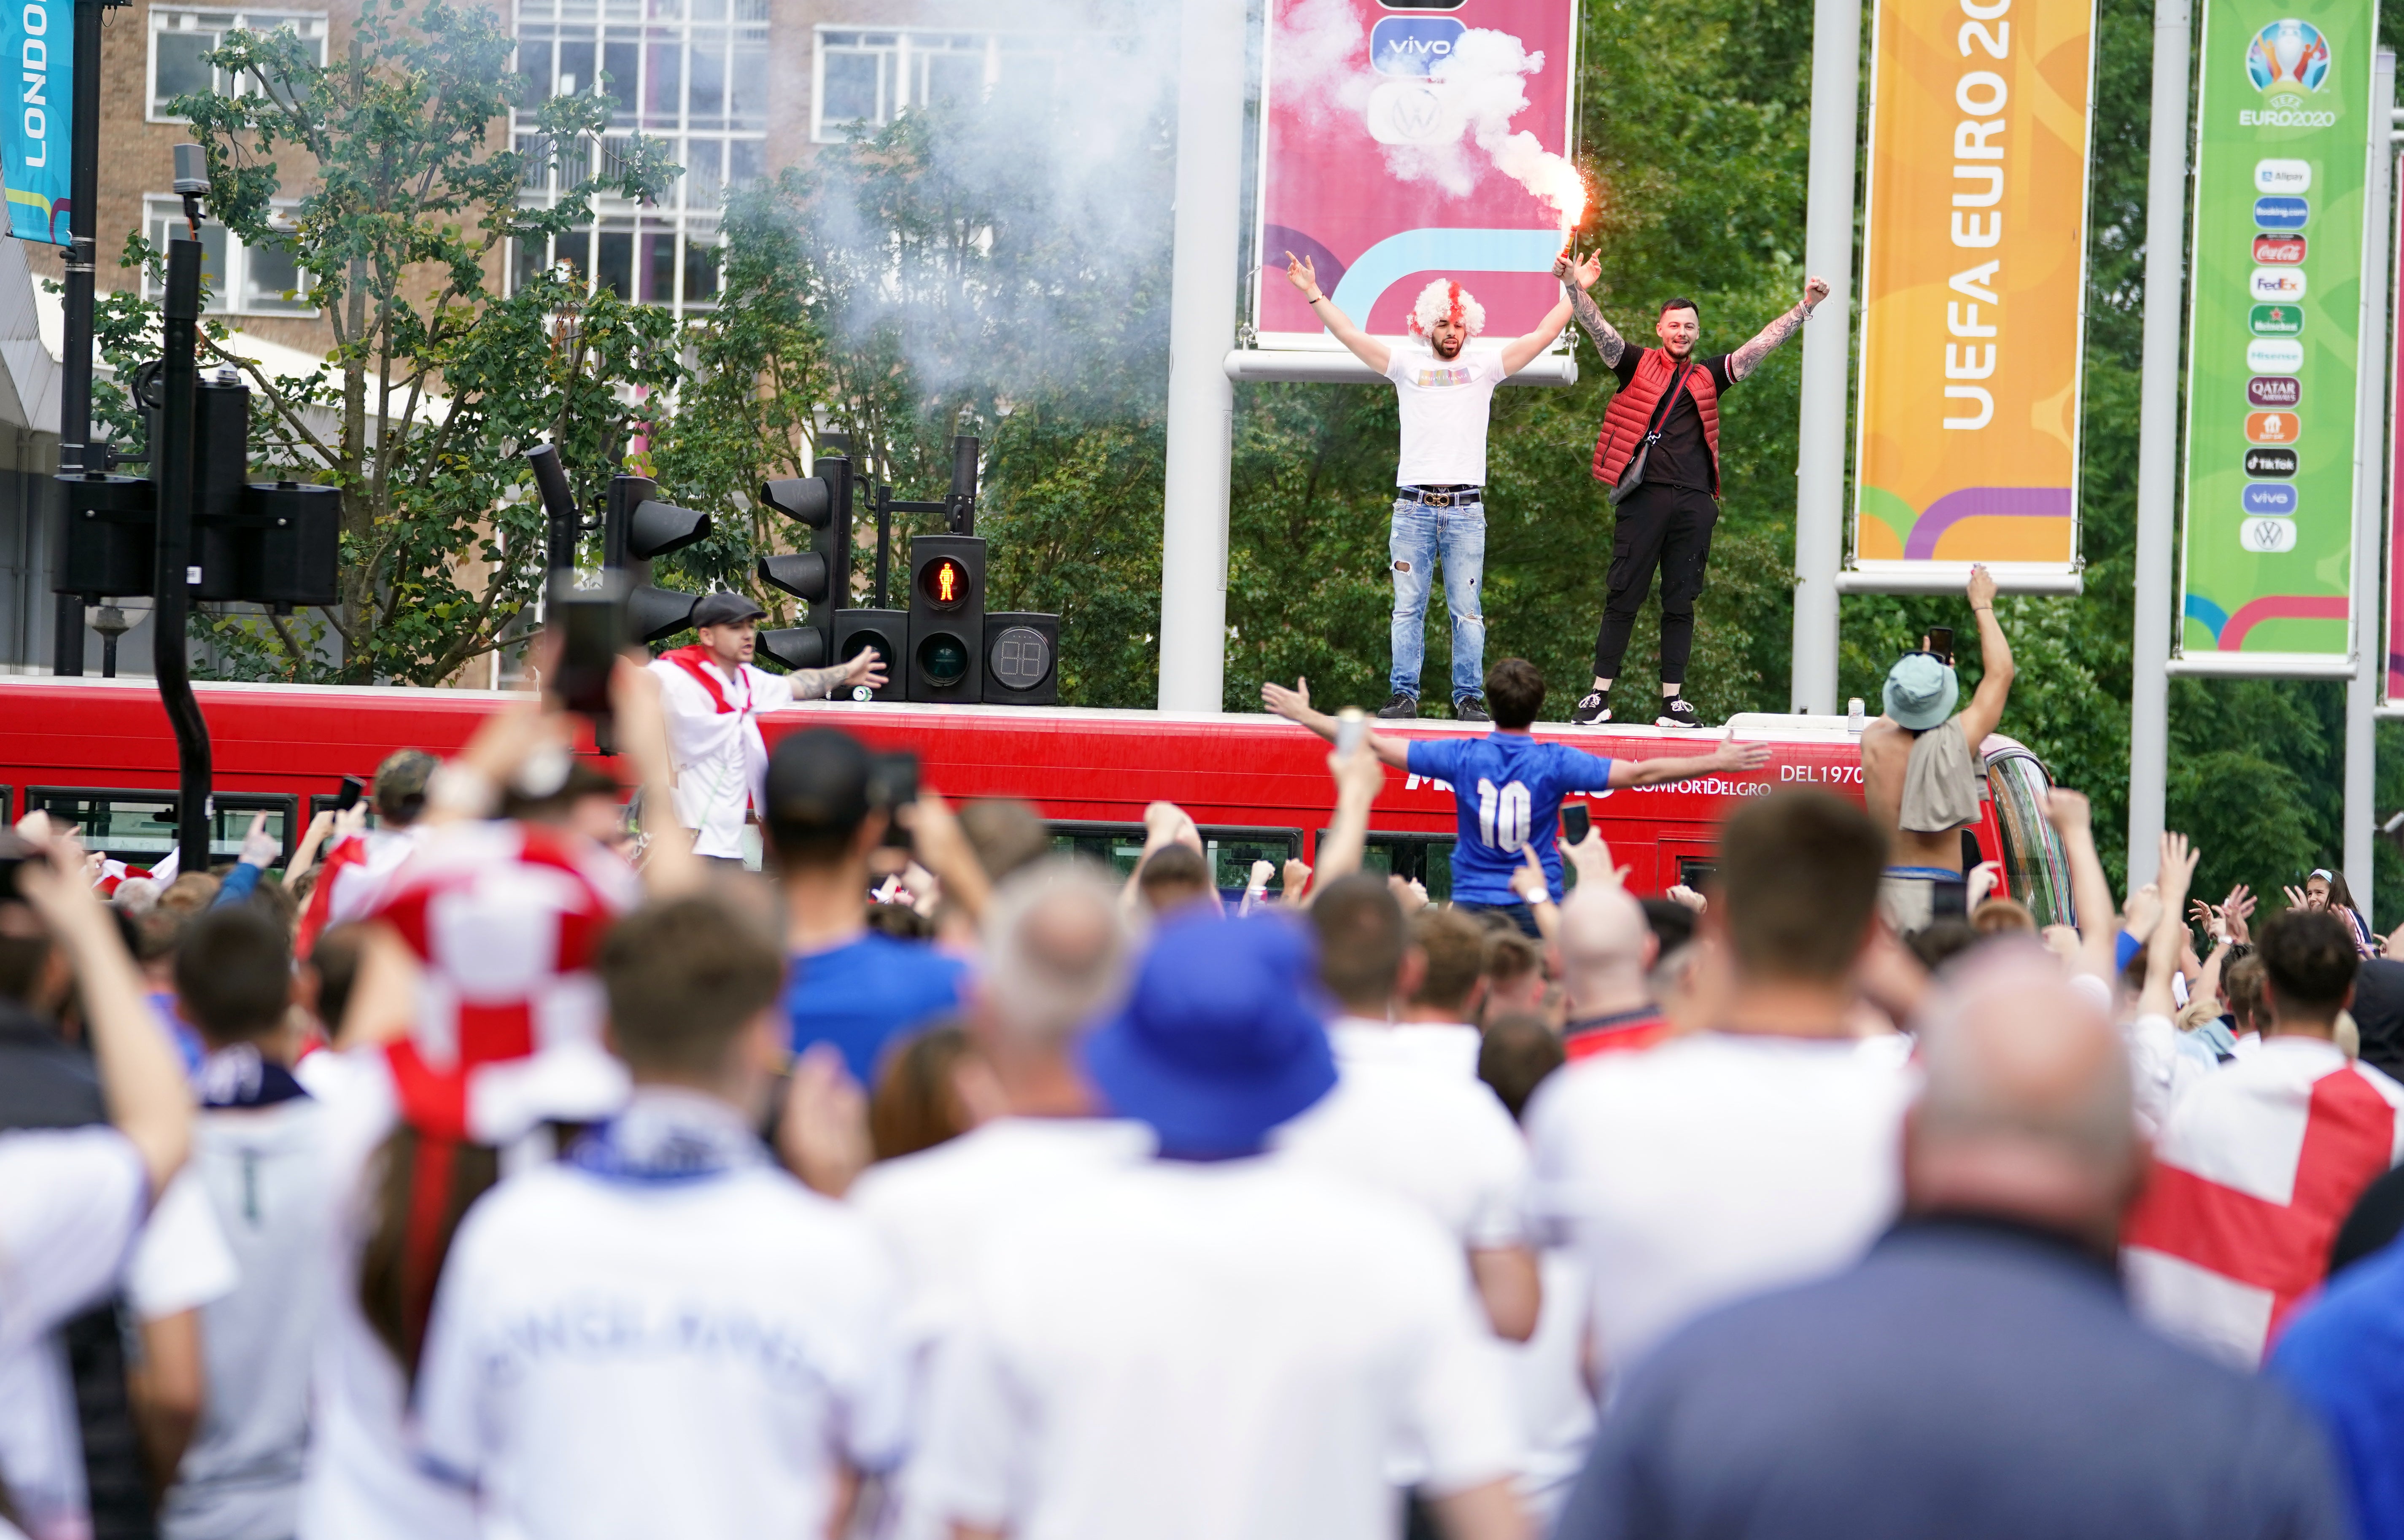 The disorder at the Euro 2020 final does not mean plans to bid for the 2030 World Cup are up in smoke, a UK Sport executive has said (Mike Egerton/PA)